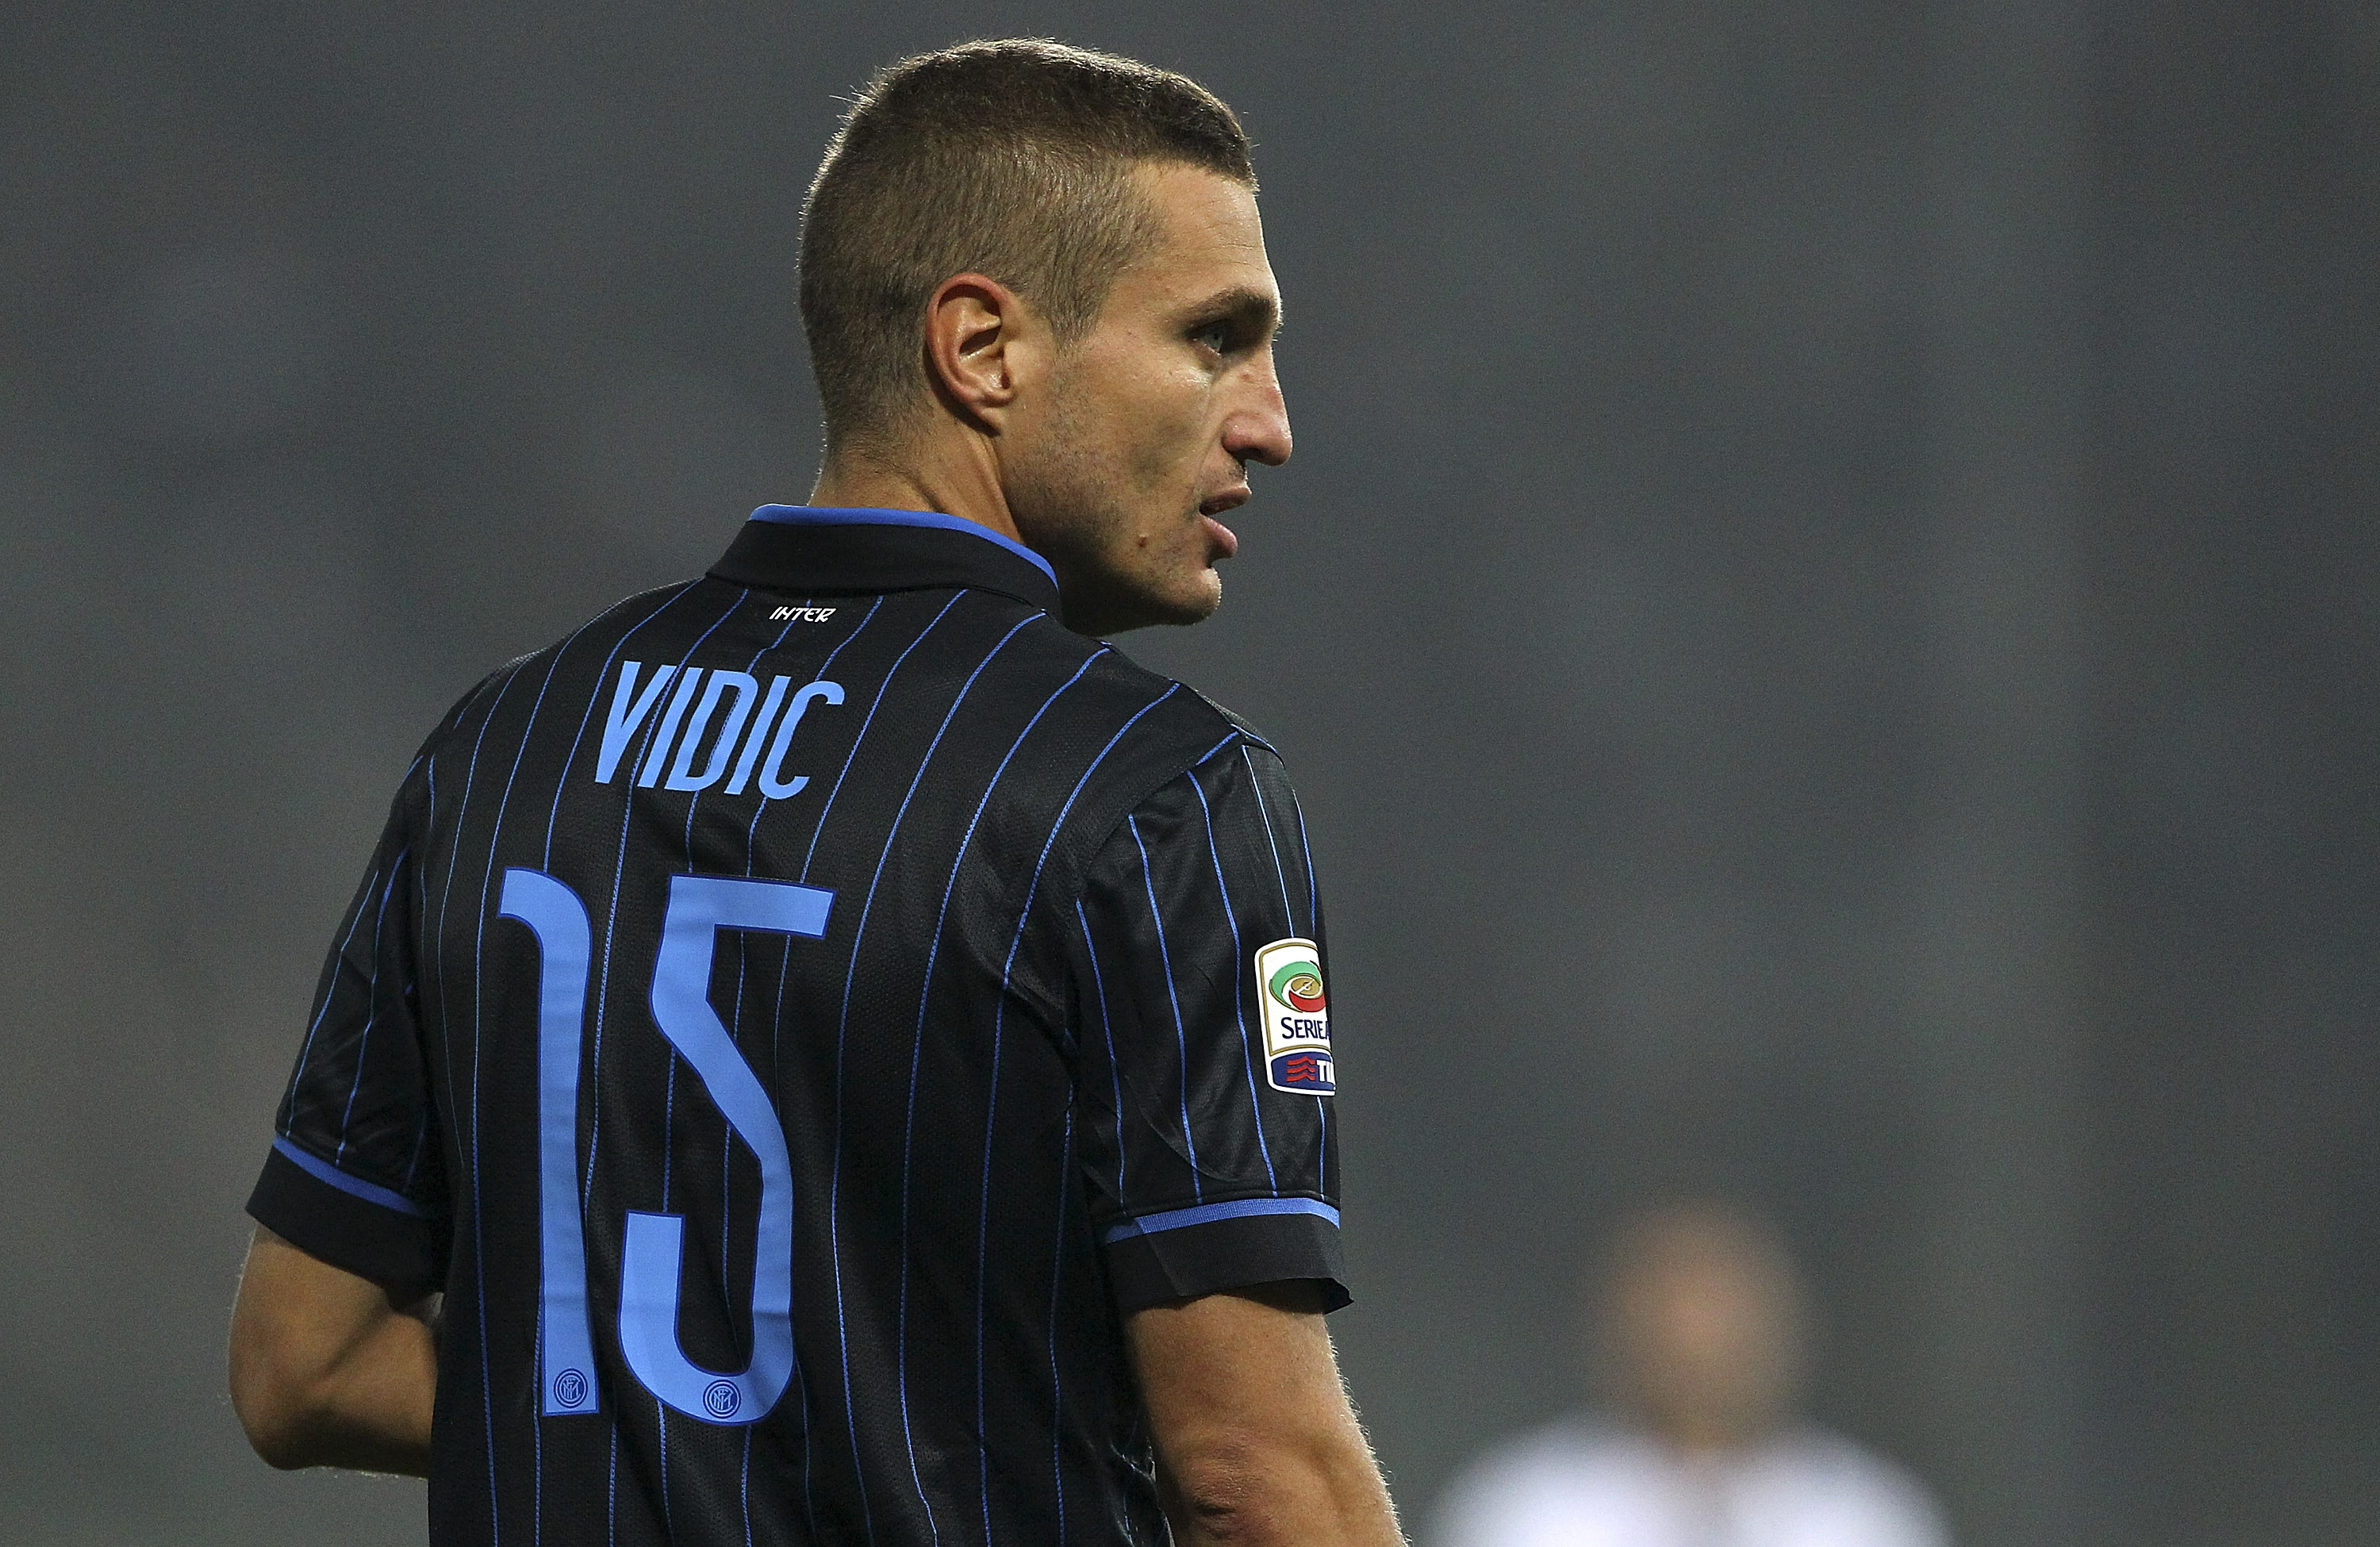 Vidic: “Pioli and Suning have generated a positive atmosphere at Inter”